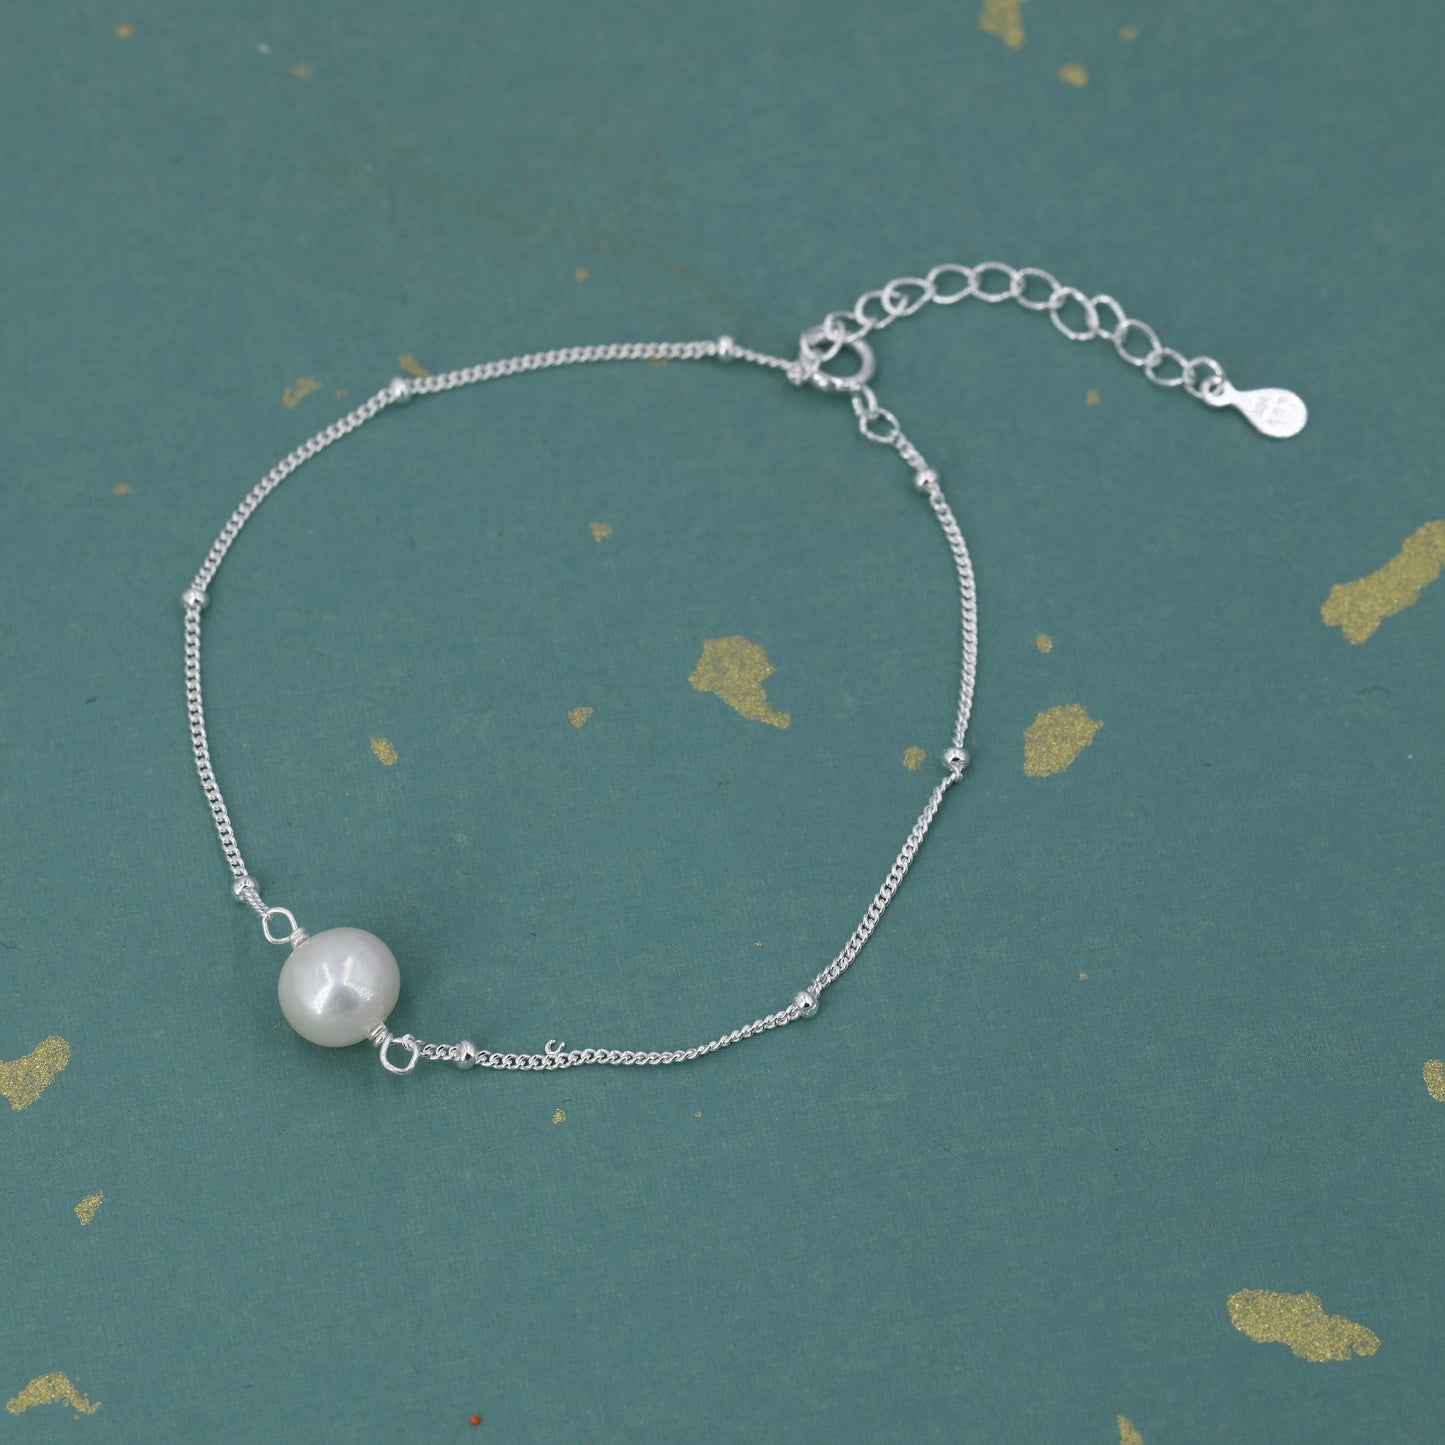 Sterling Silver Natural Pearl Bracelet with a Satellite Chain, Single Genuine Pearl Bracelet, Freshwater Pearl Bracelet, Silver or Gold